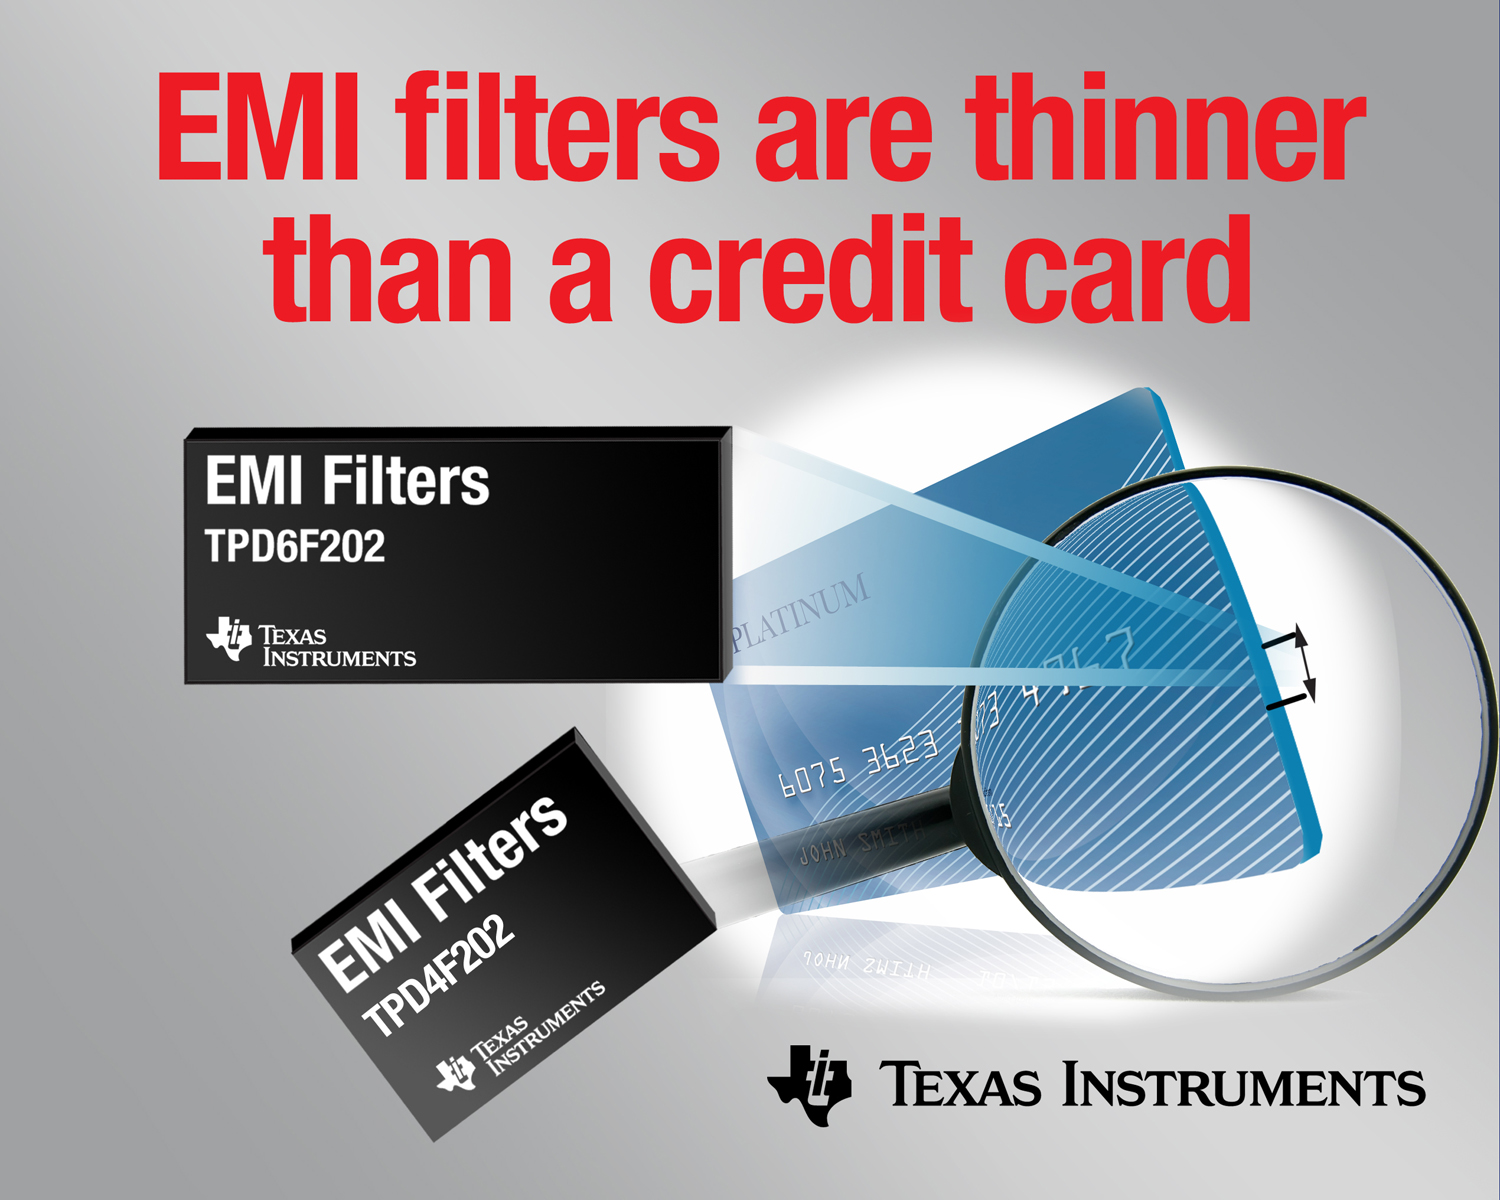 Texas Instruments Delivers Thinnest EMI Filters with Highest ESD Performance